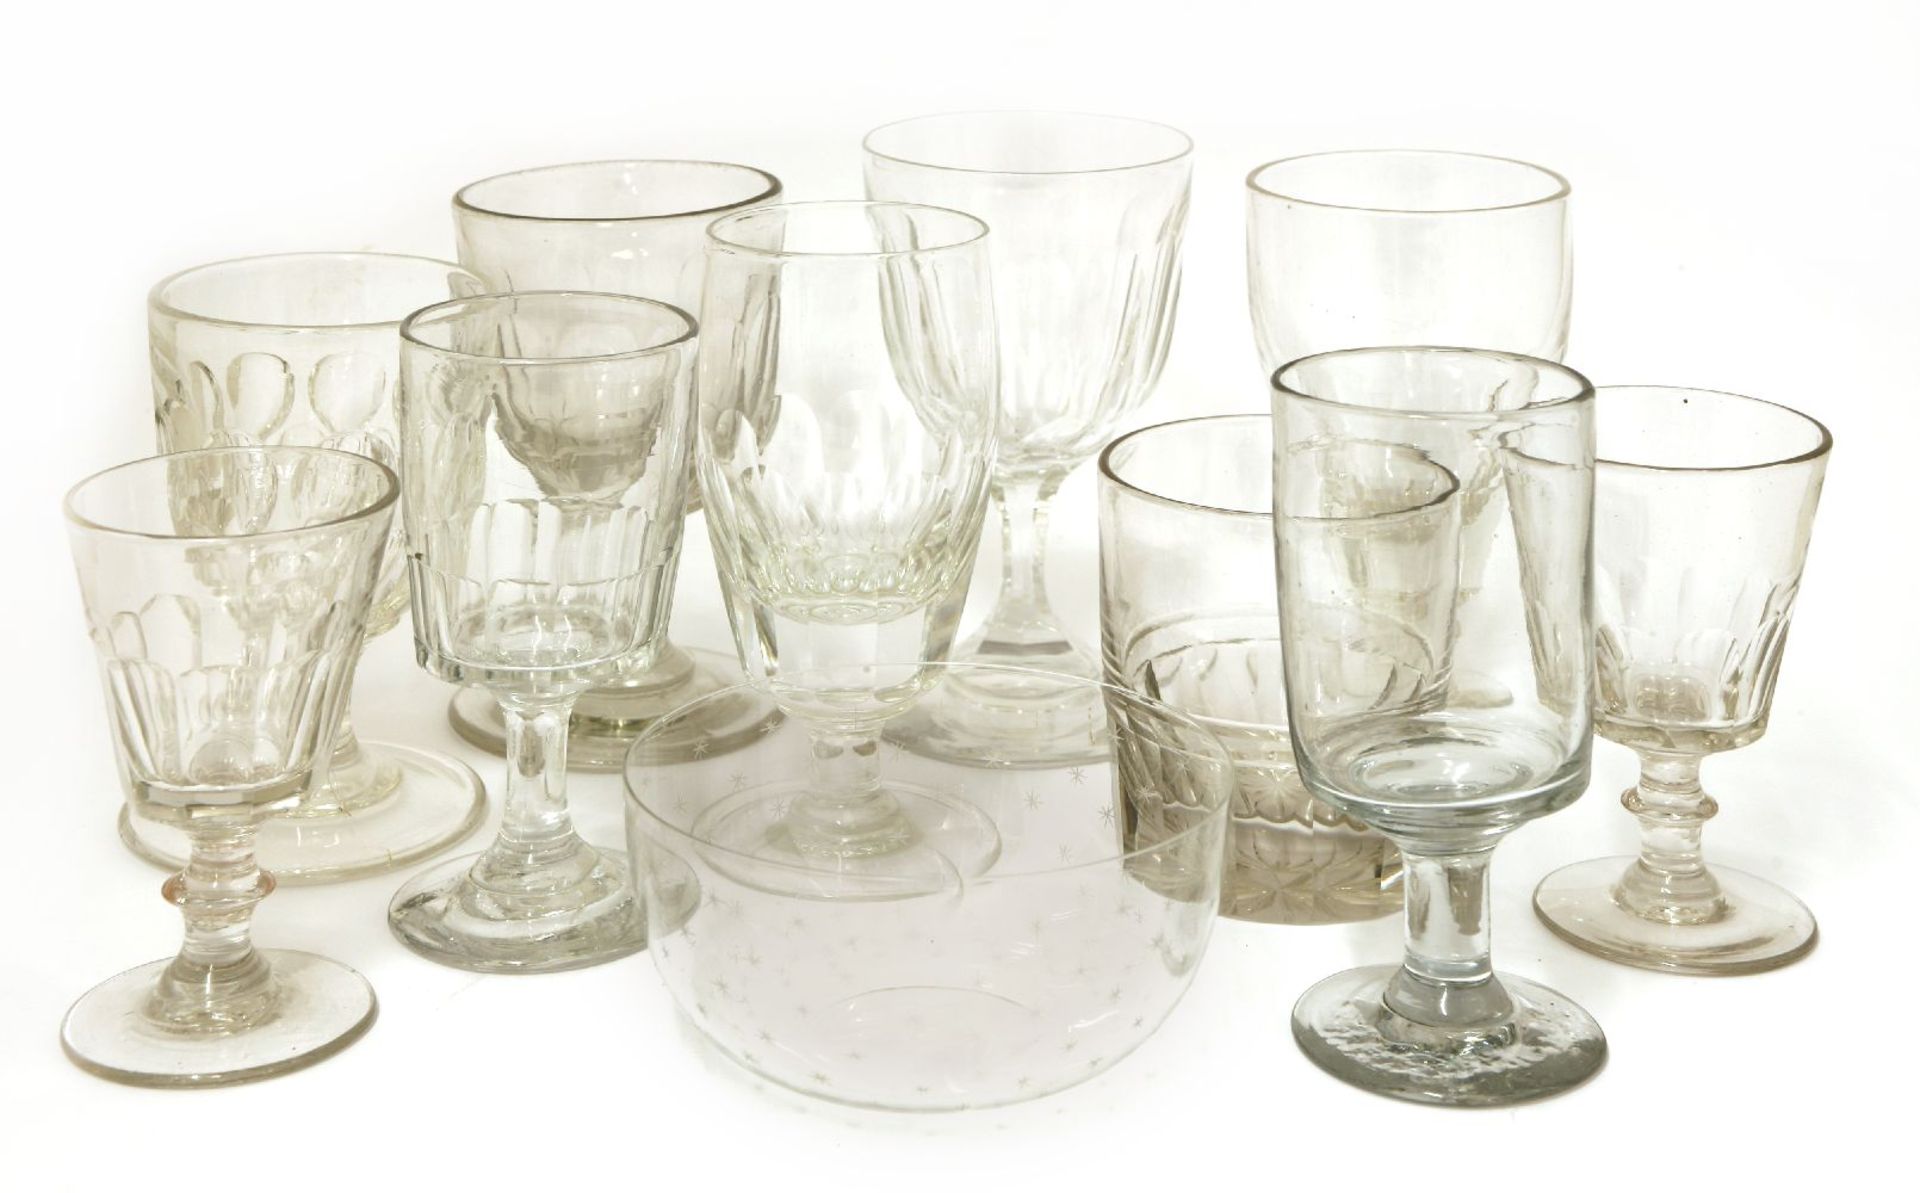 Seven glass tumblers, 19th century, each with a faceted and star cut base,10cm high, together with a